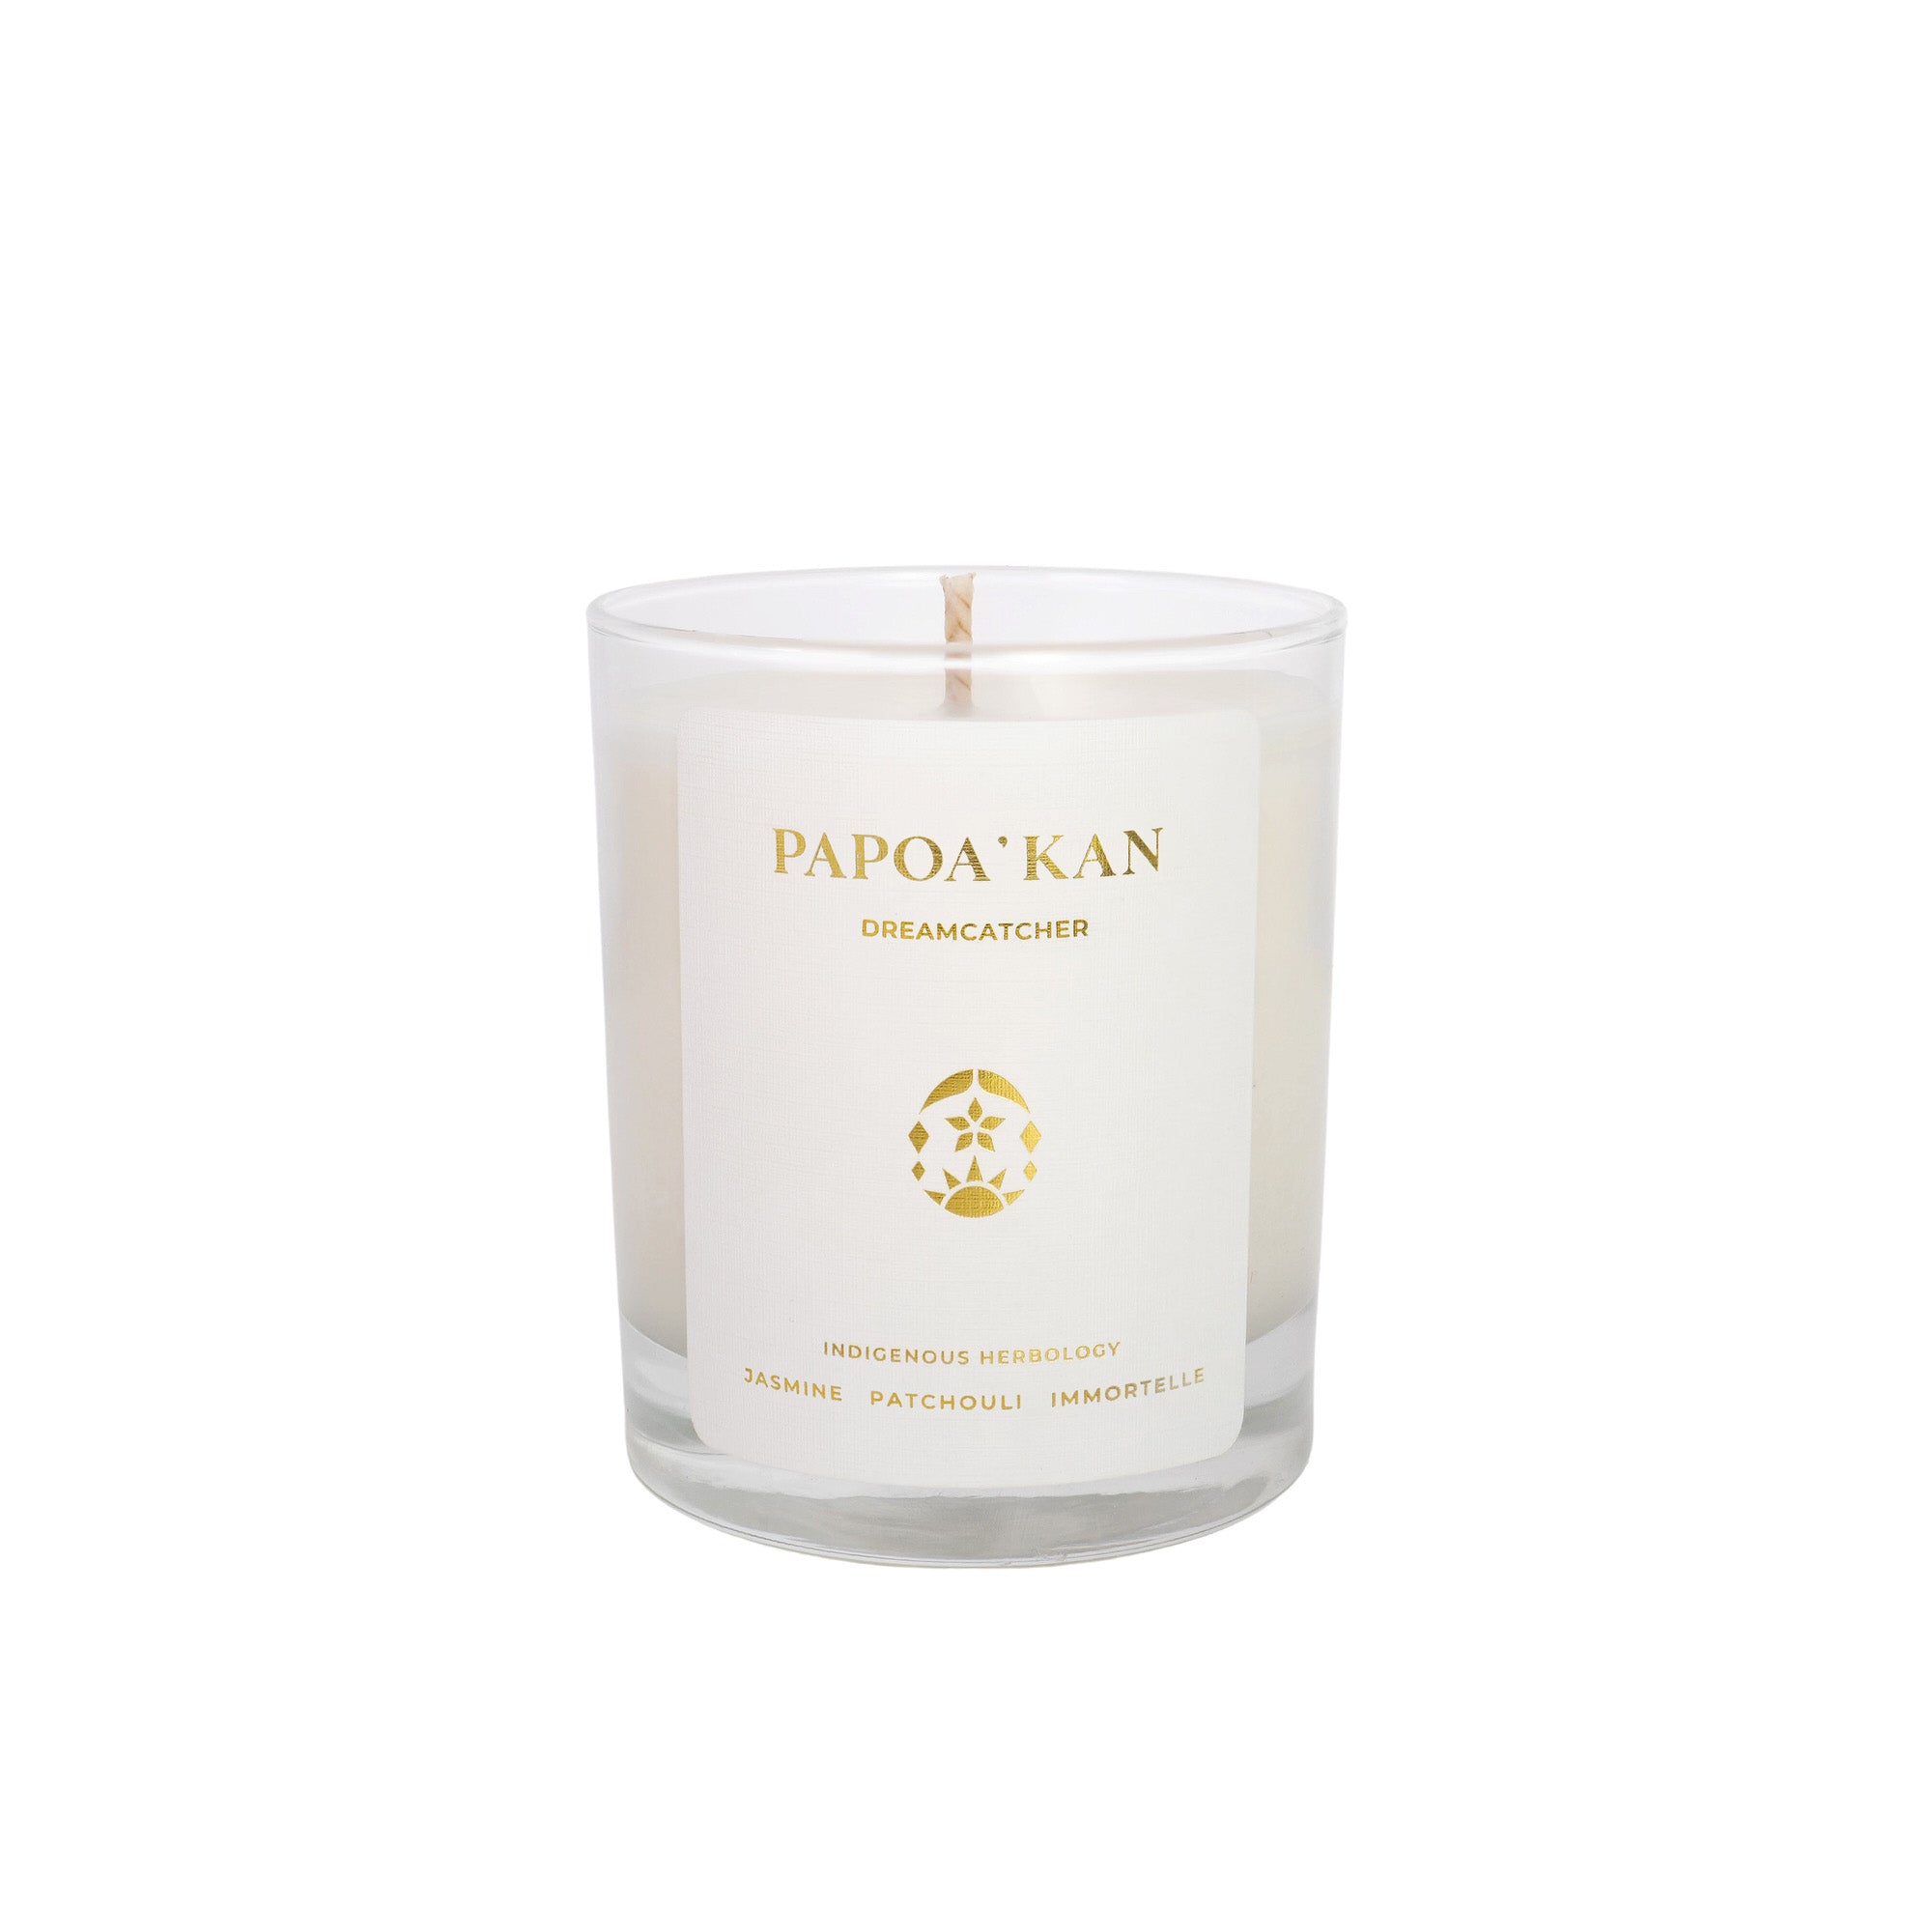 PAPOA'KAN - Dreamcatcher - Classic Candle